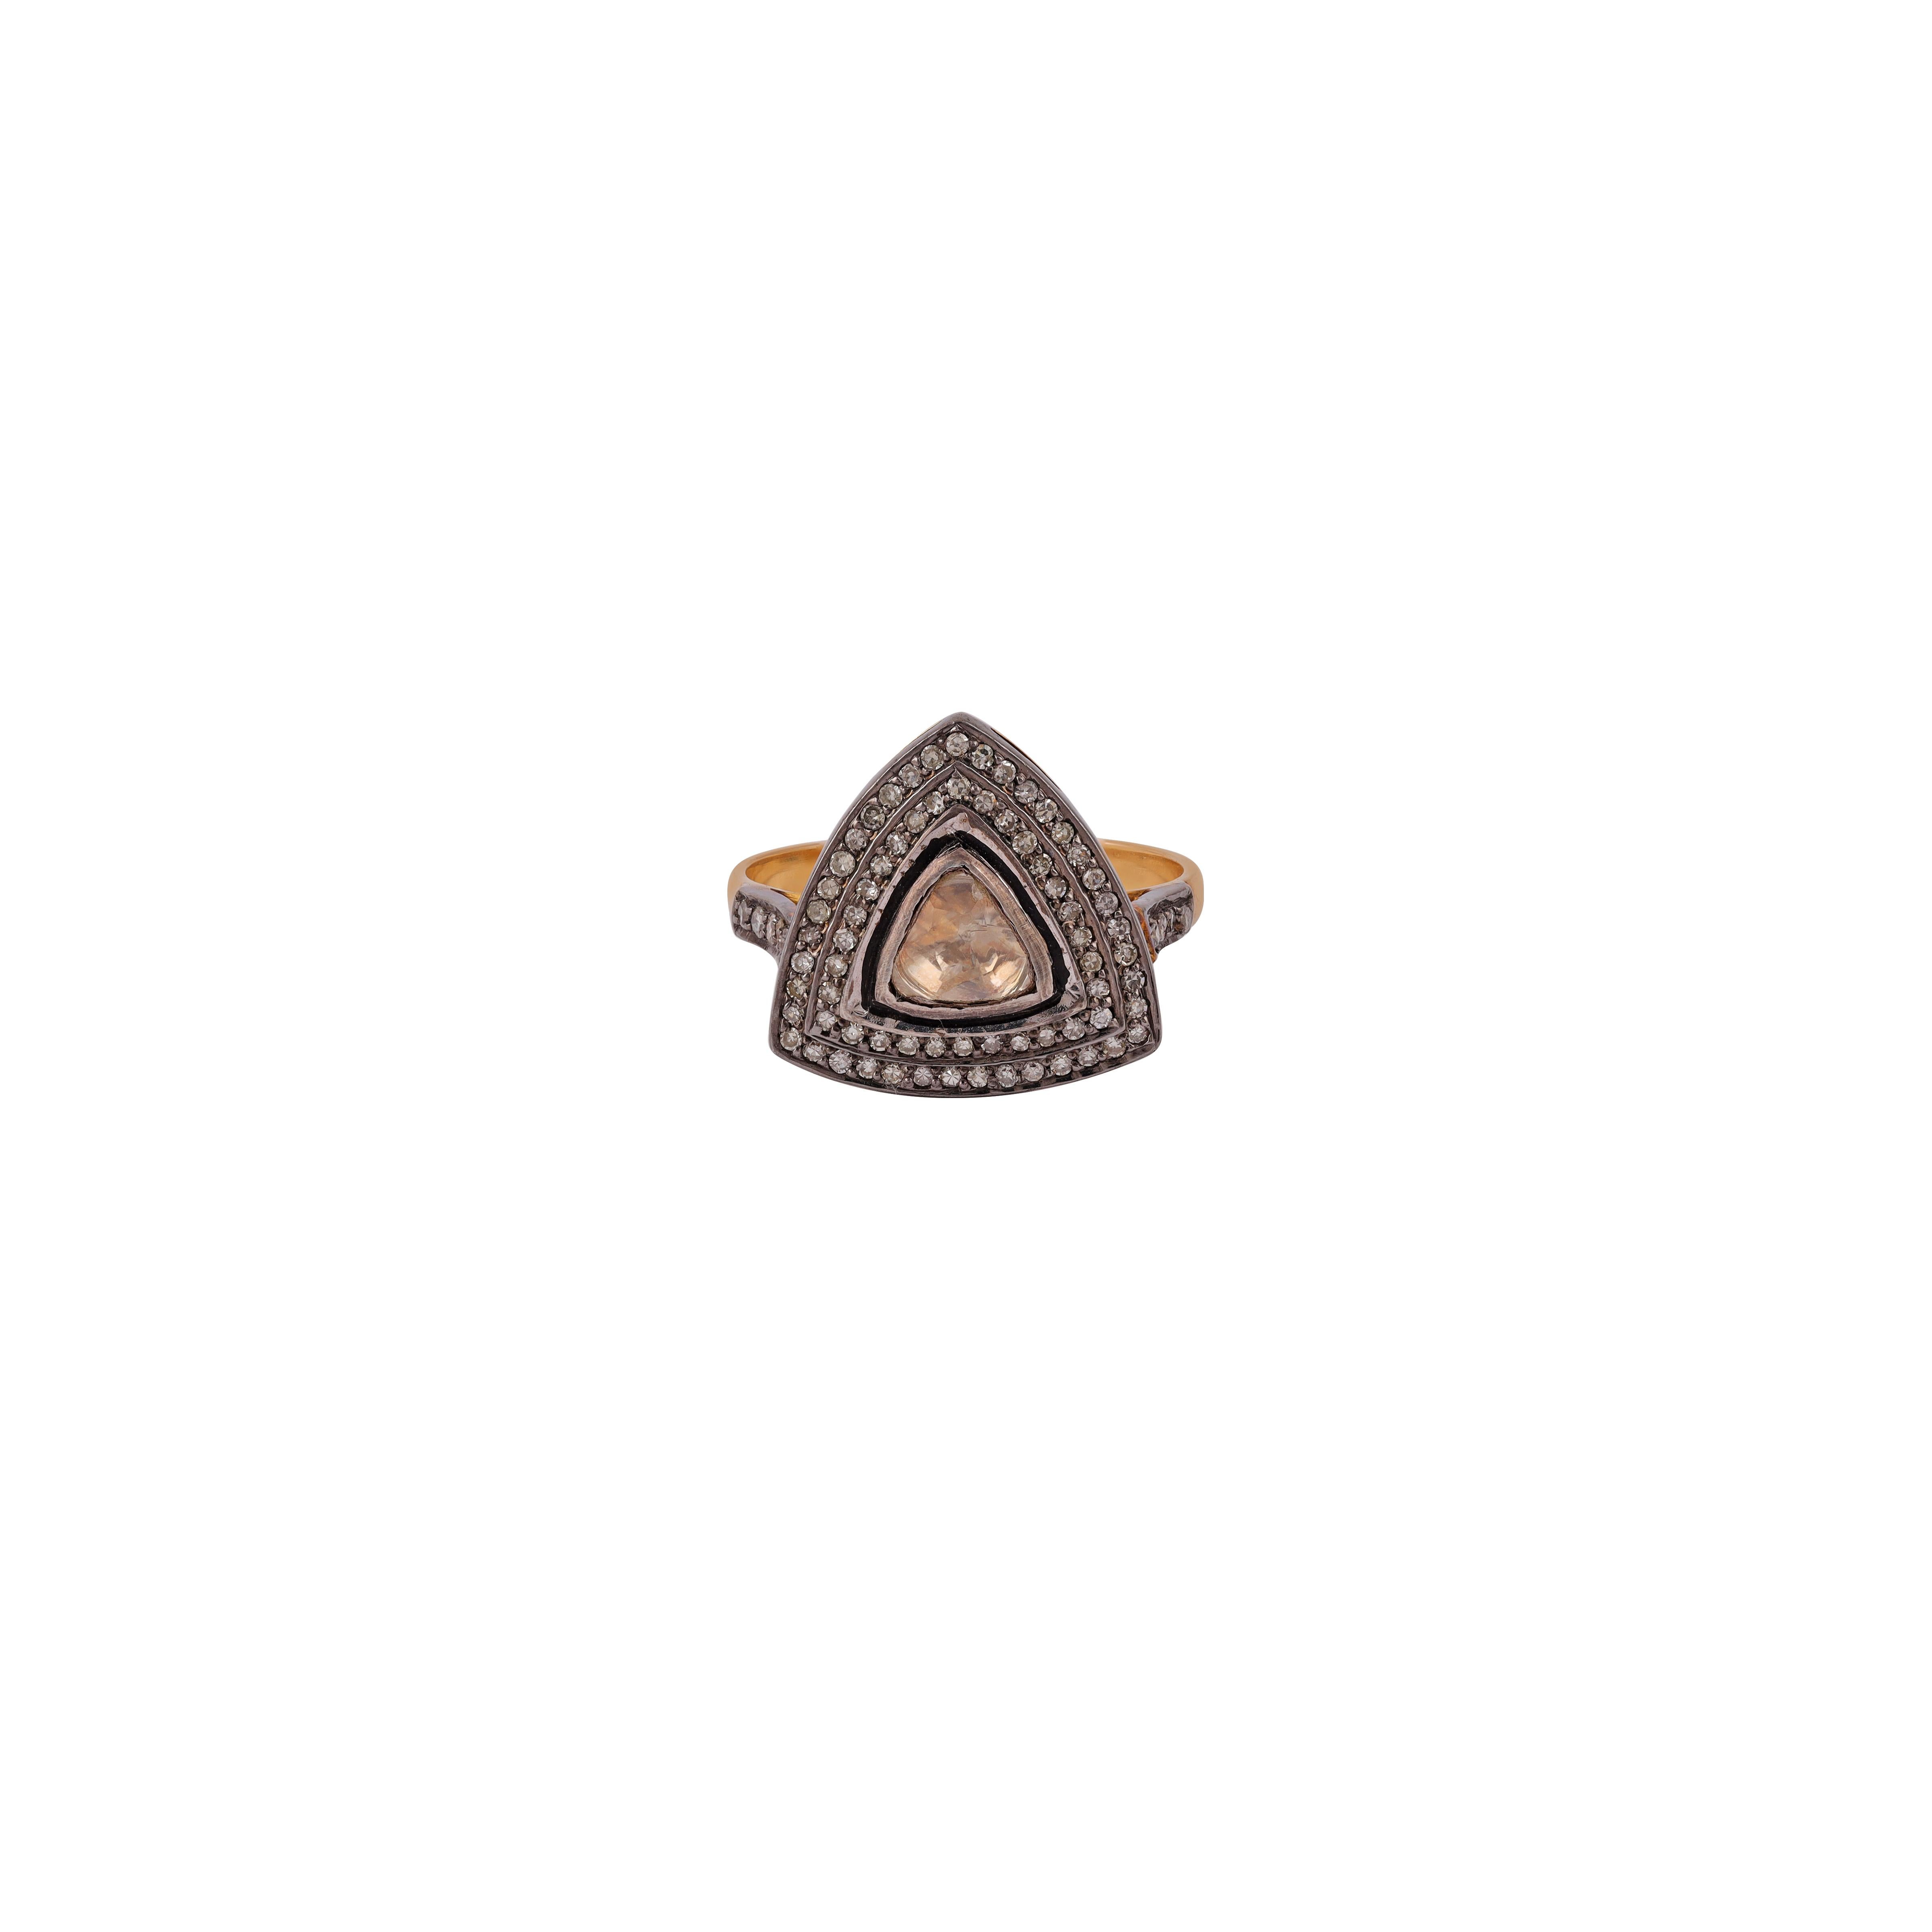 Magnificent Victorian  0.44 Carats Antique Cut Diamond 18k Gold Silver Ring
0.44 Carats Antique Cut Diamond 
18k Gold : 1.85
silver : 1.54

Custom Services
Resizing is available.
Request Customization